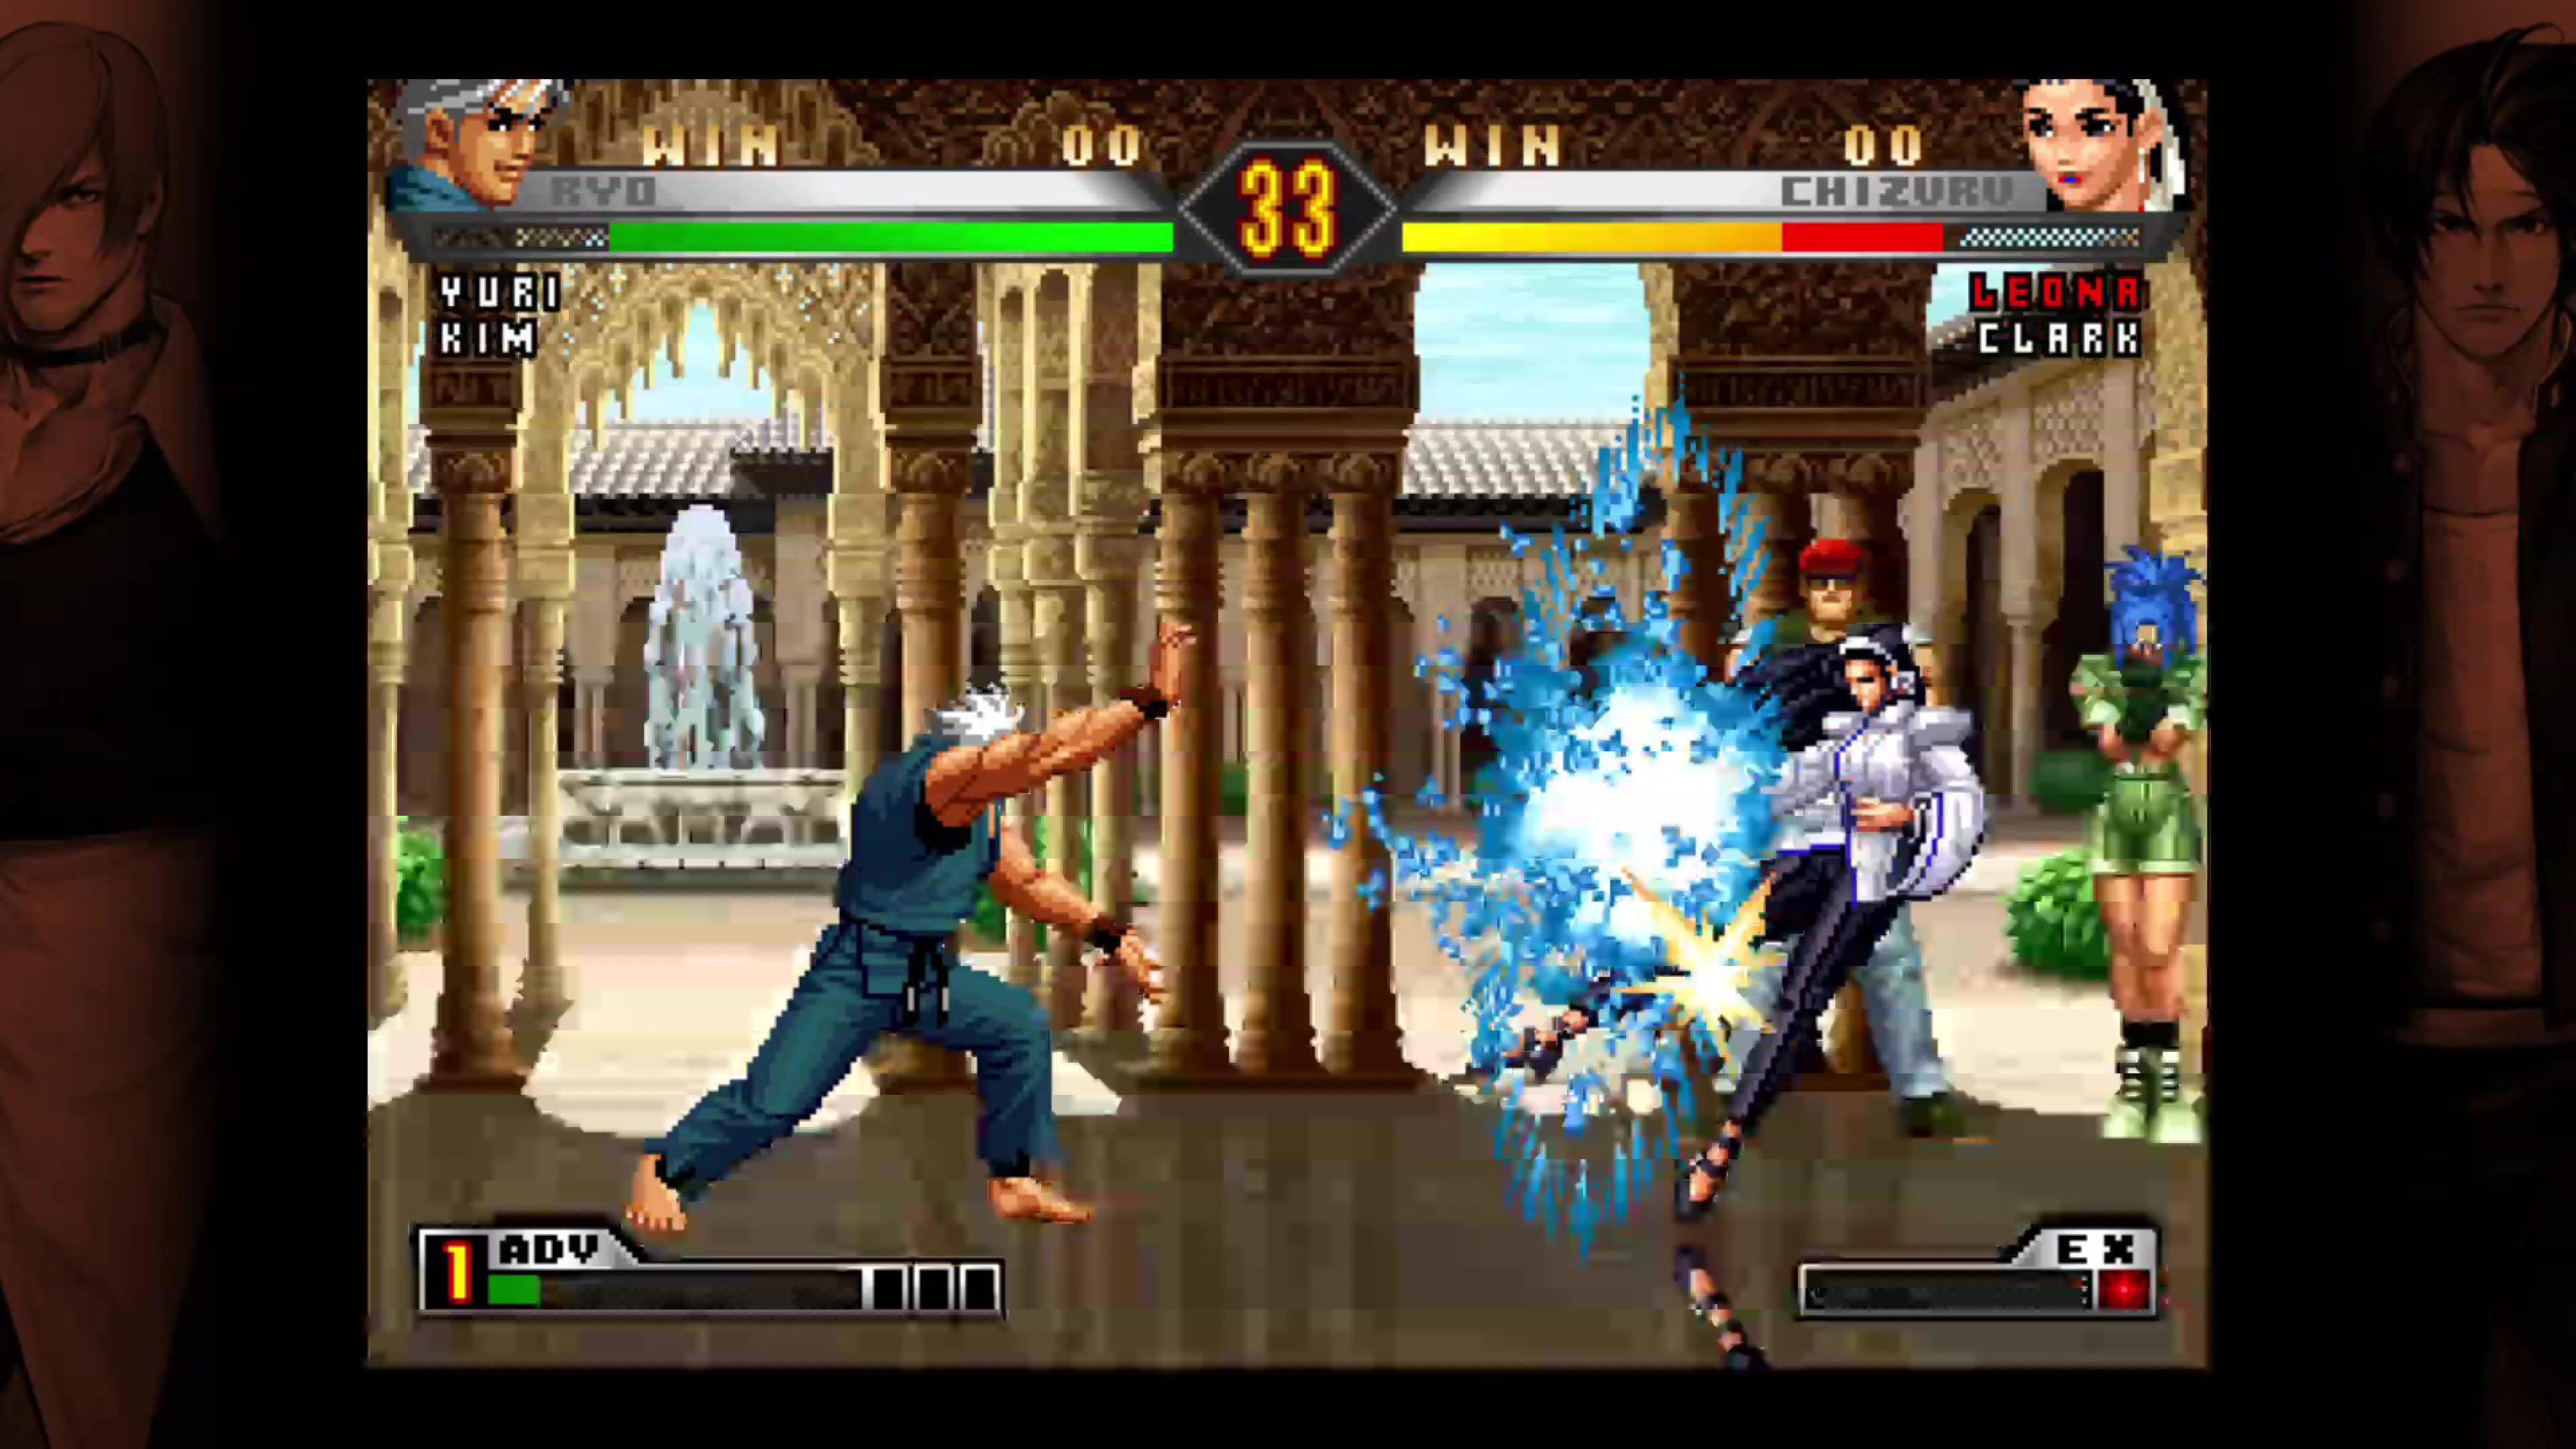 King of Fighters 98: Ultimate Match